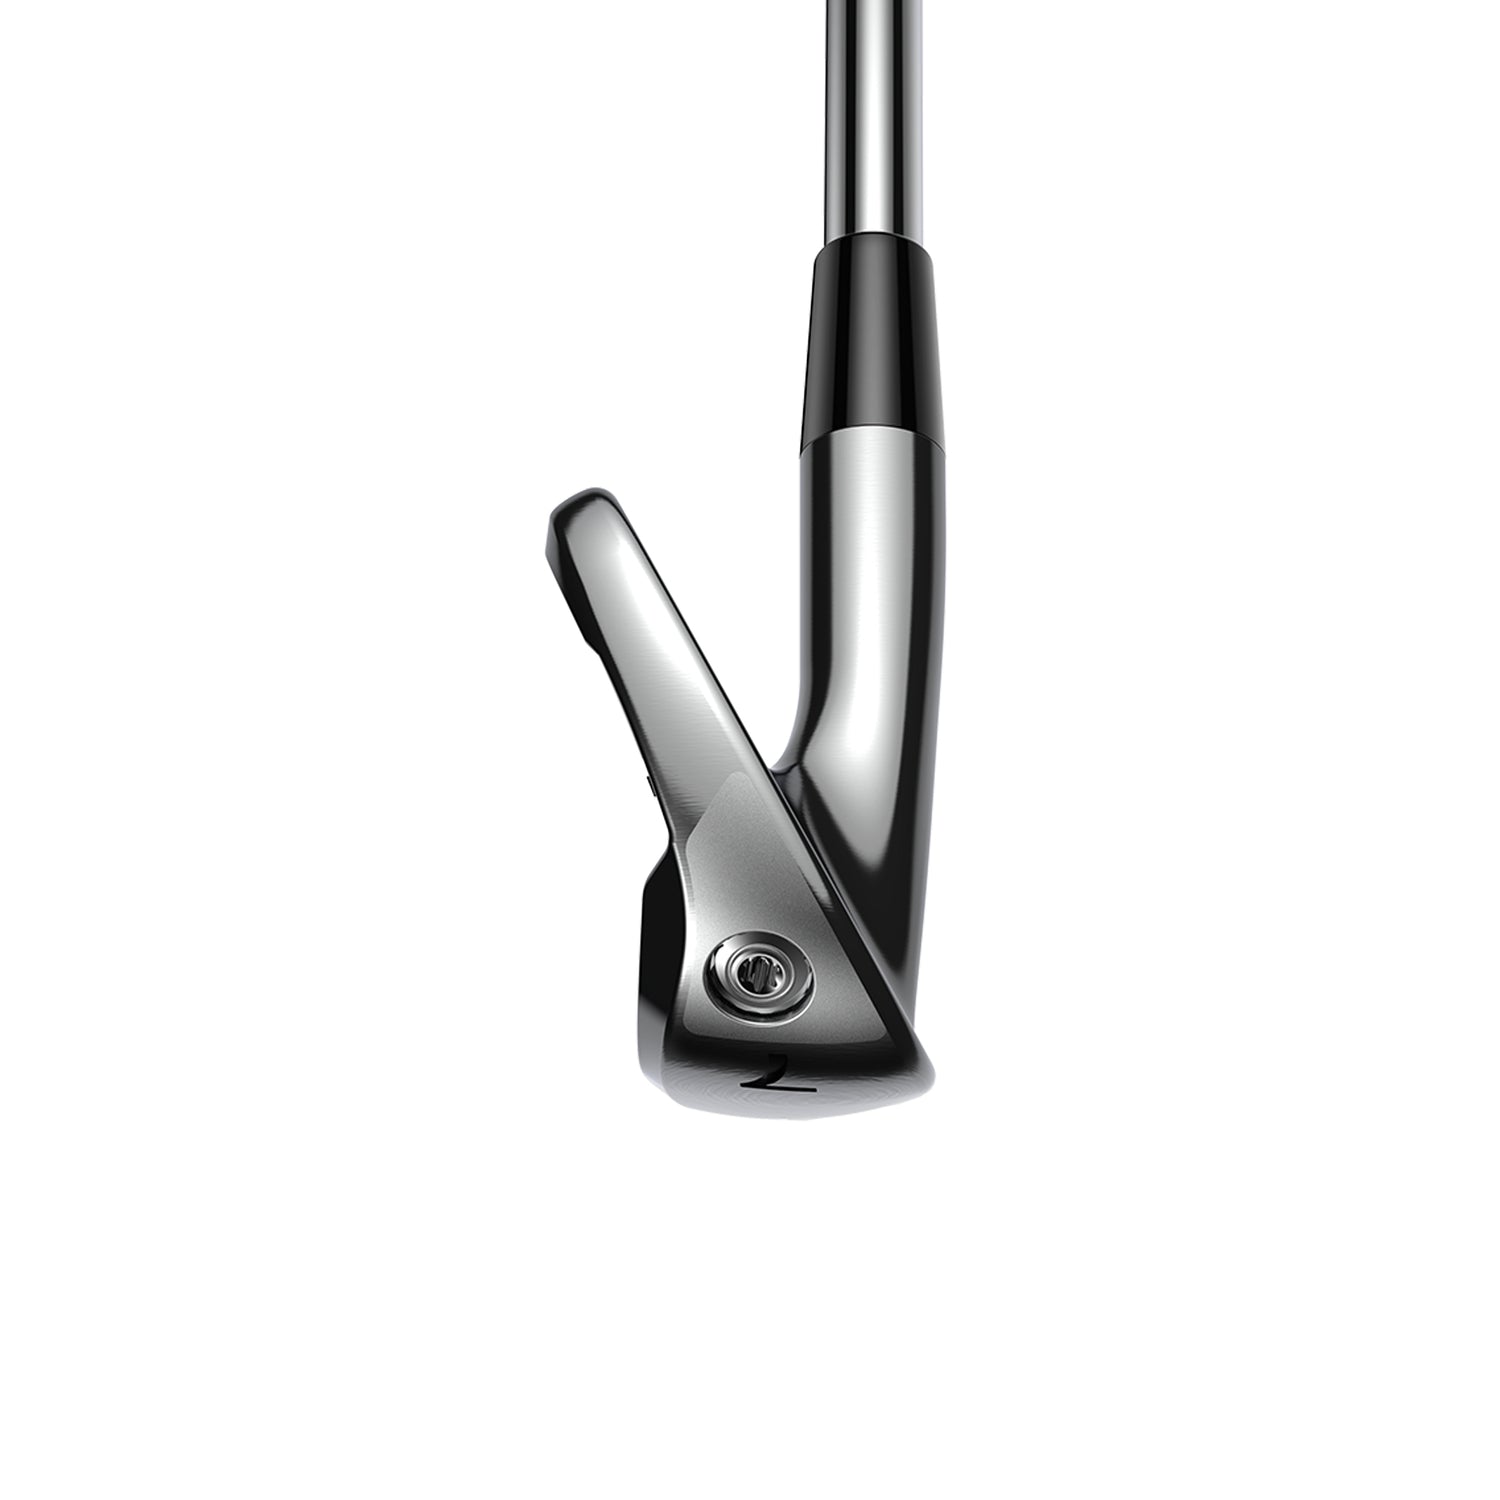 KING Forged Tec ONE Length Irons – COBRA Golf